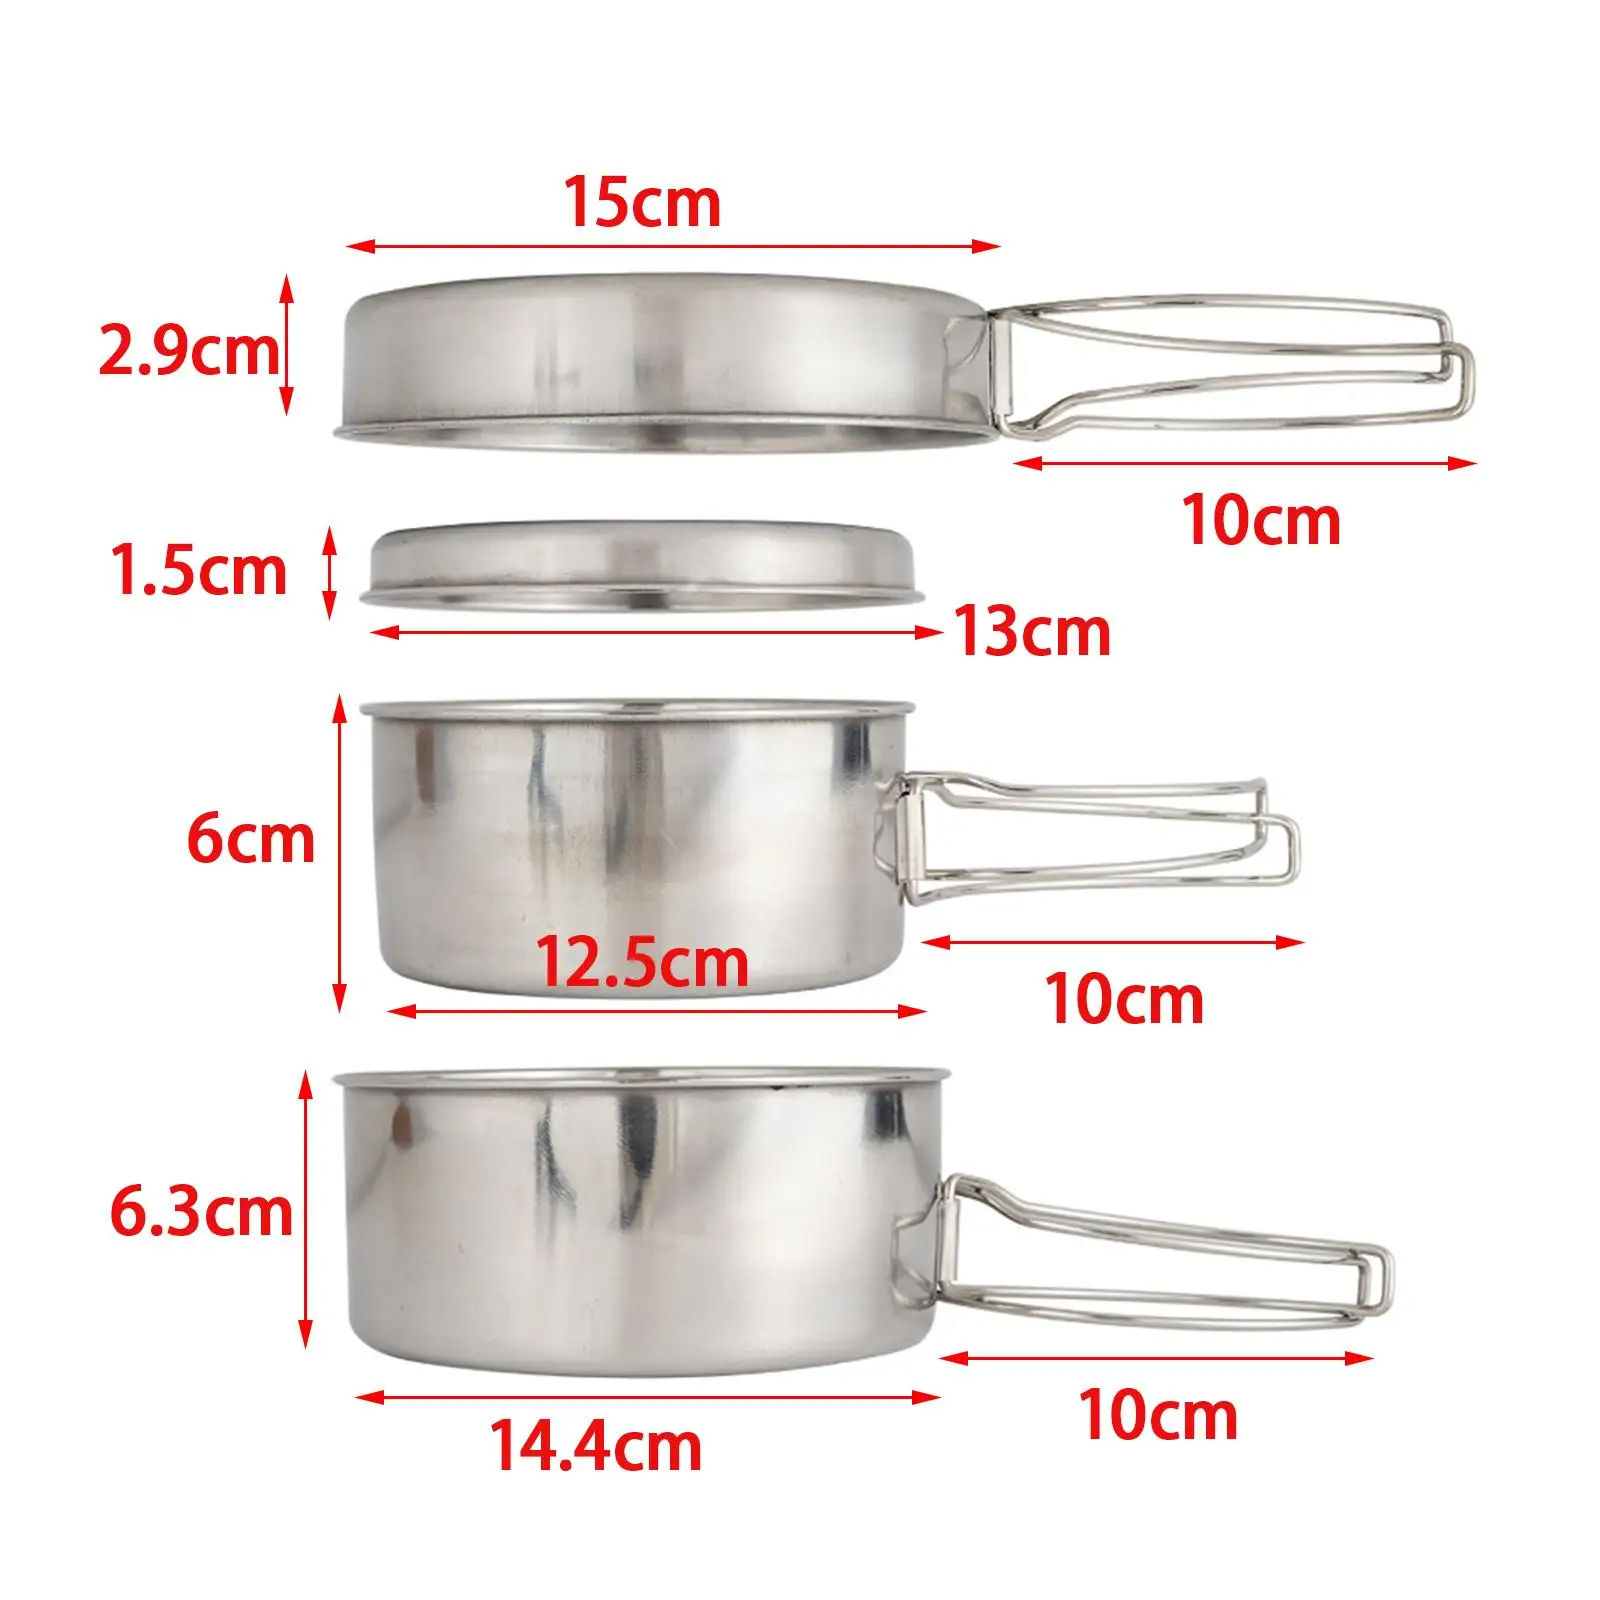 Camping Pots and Pans Set Camping Cooking Pots Camping Cooking Cookware Set Portable Large Capacity for Outdoor Hiking Touring